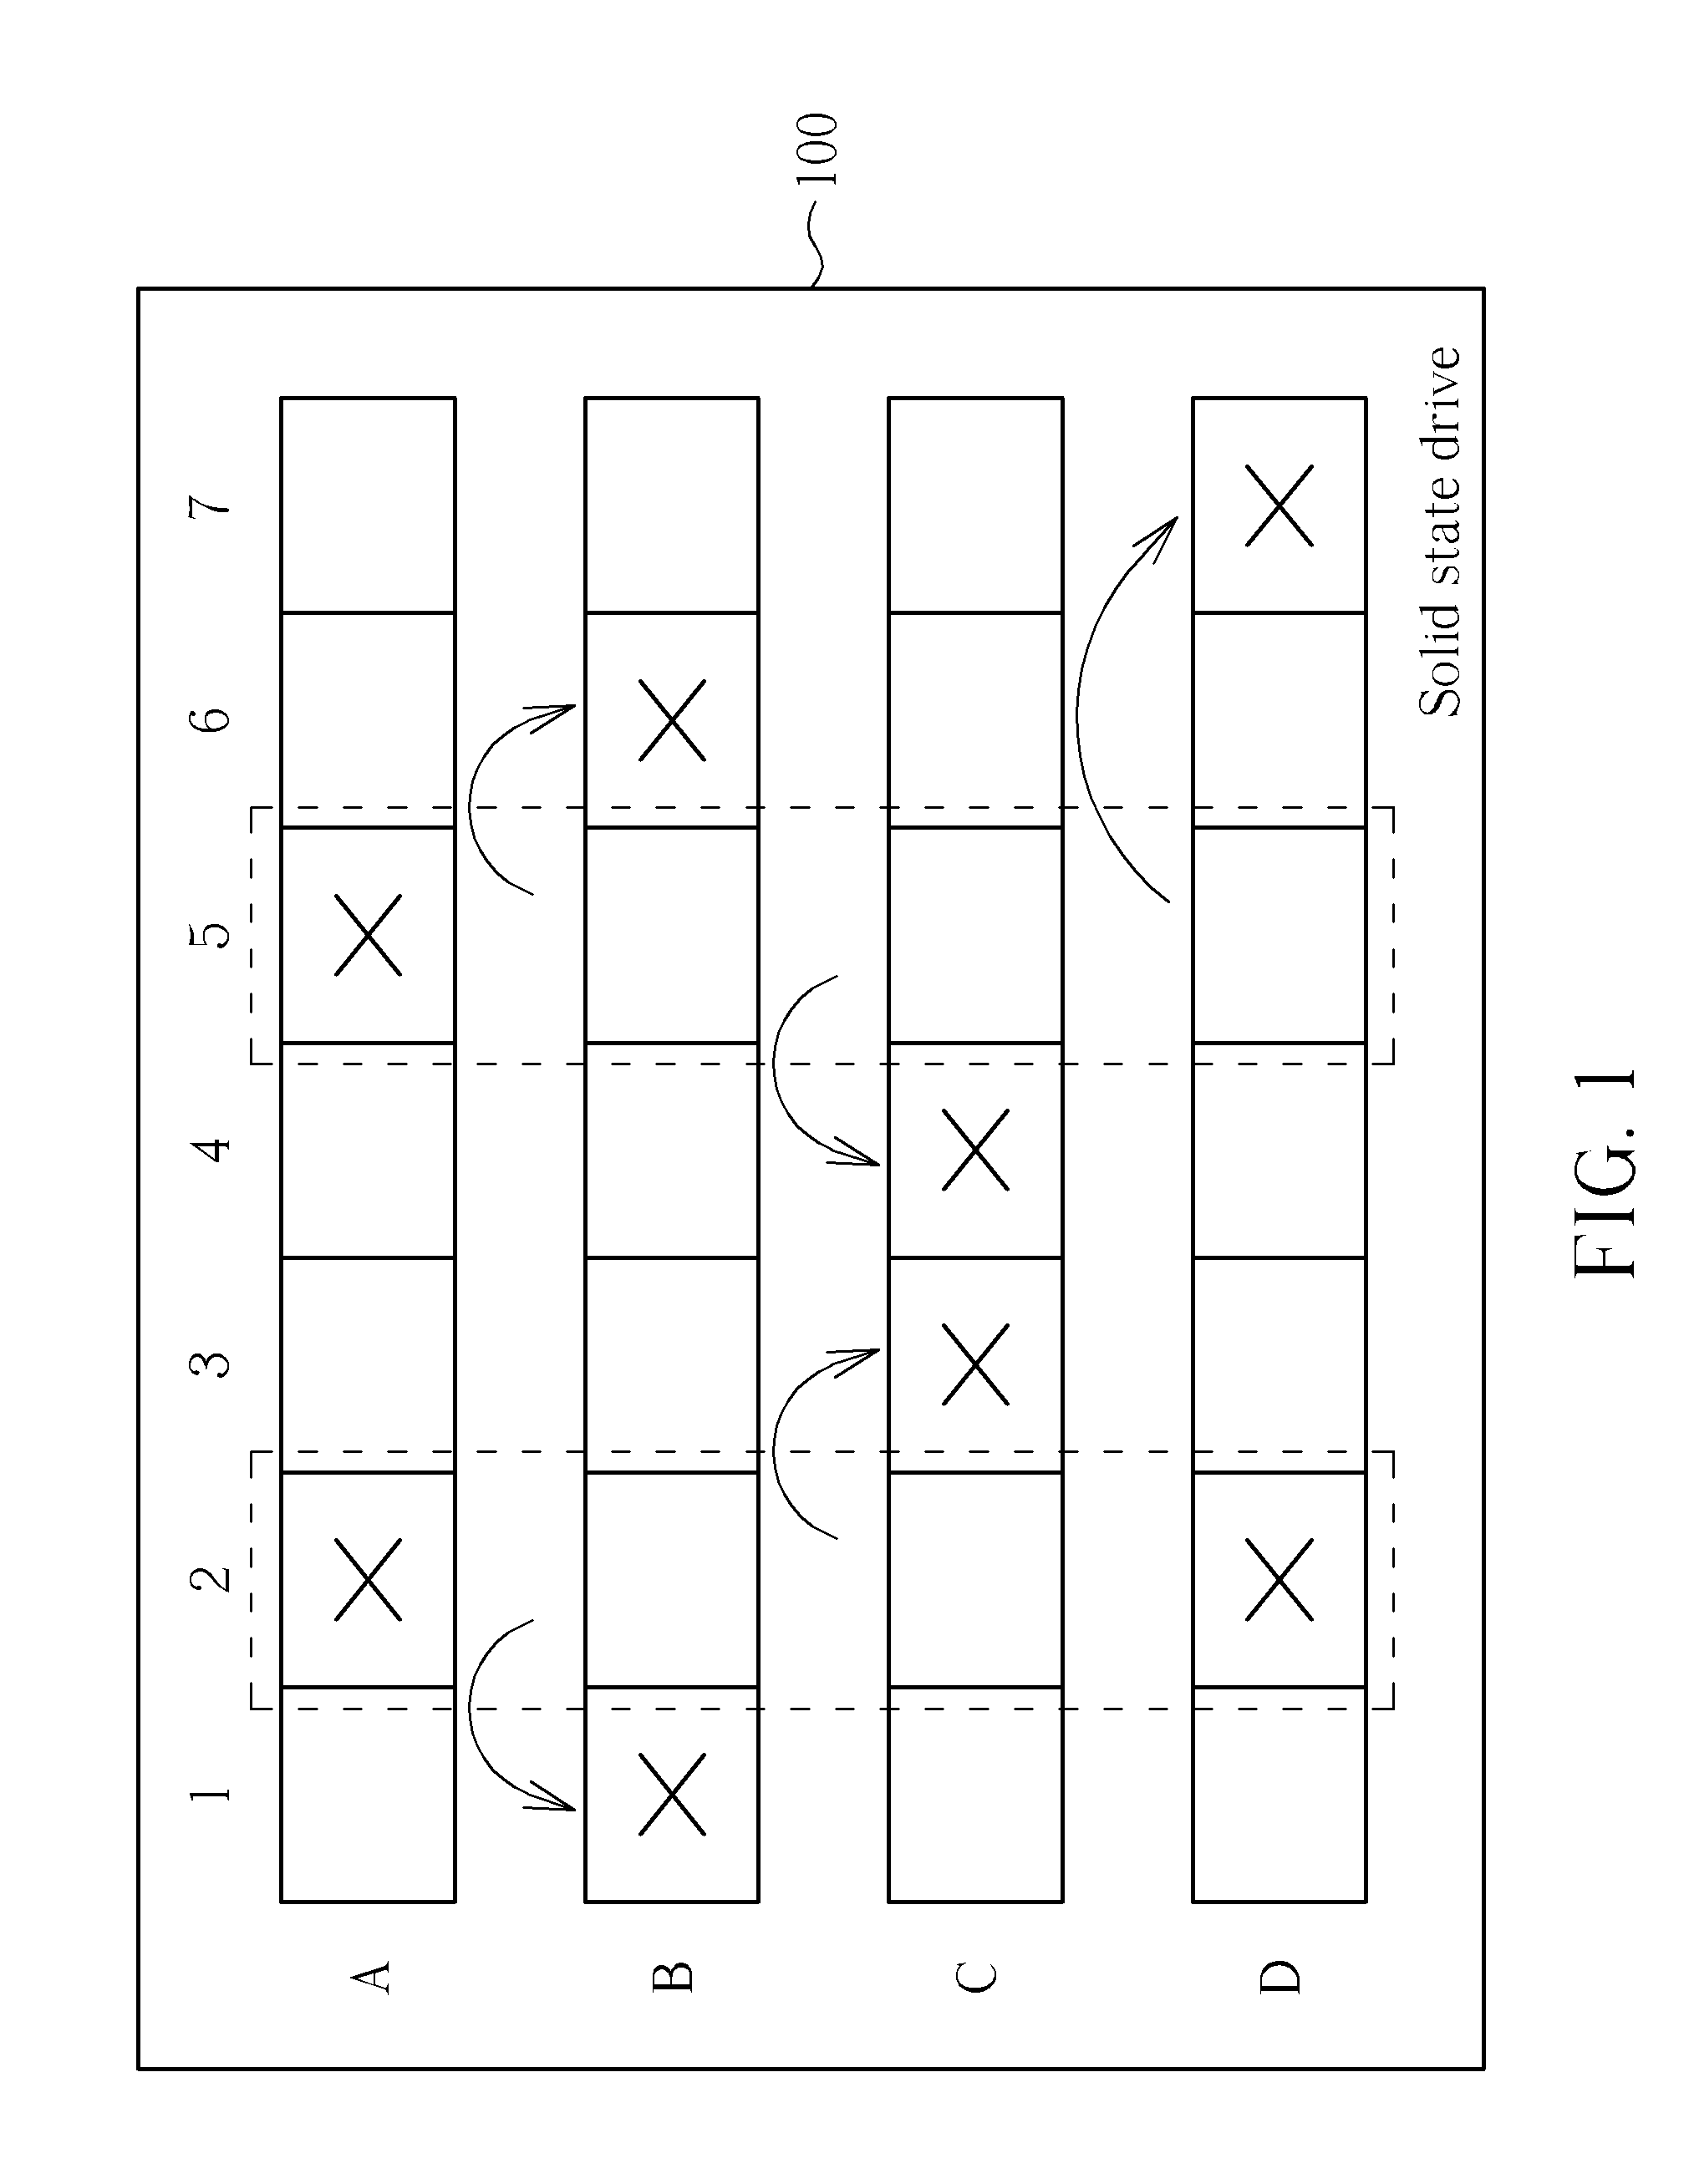 Method for accessing storage apparatus and related control circuit